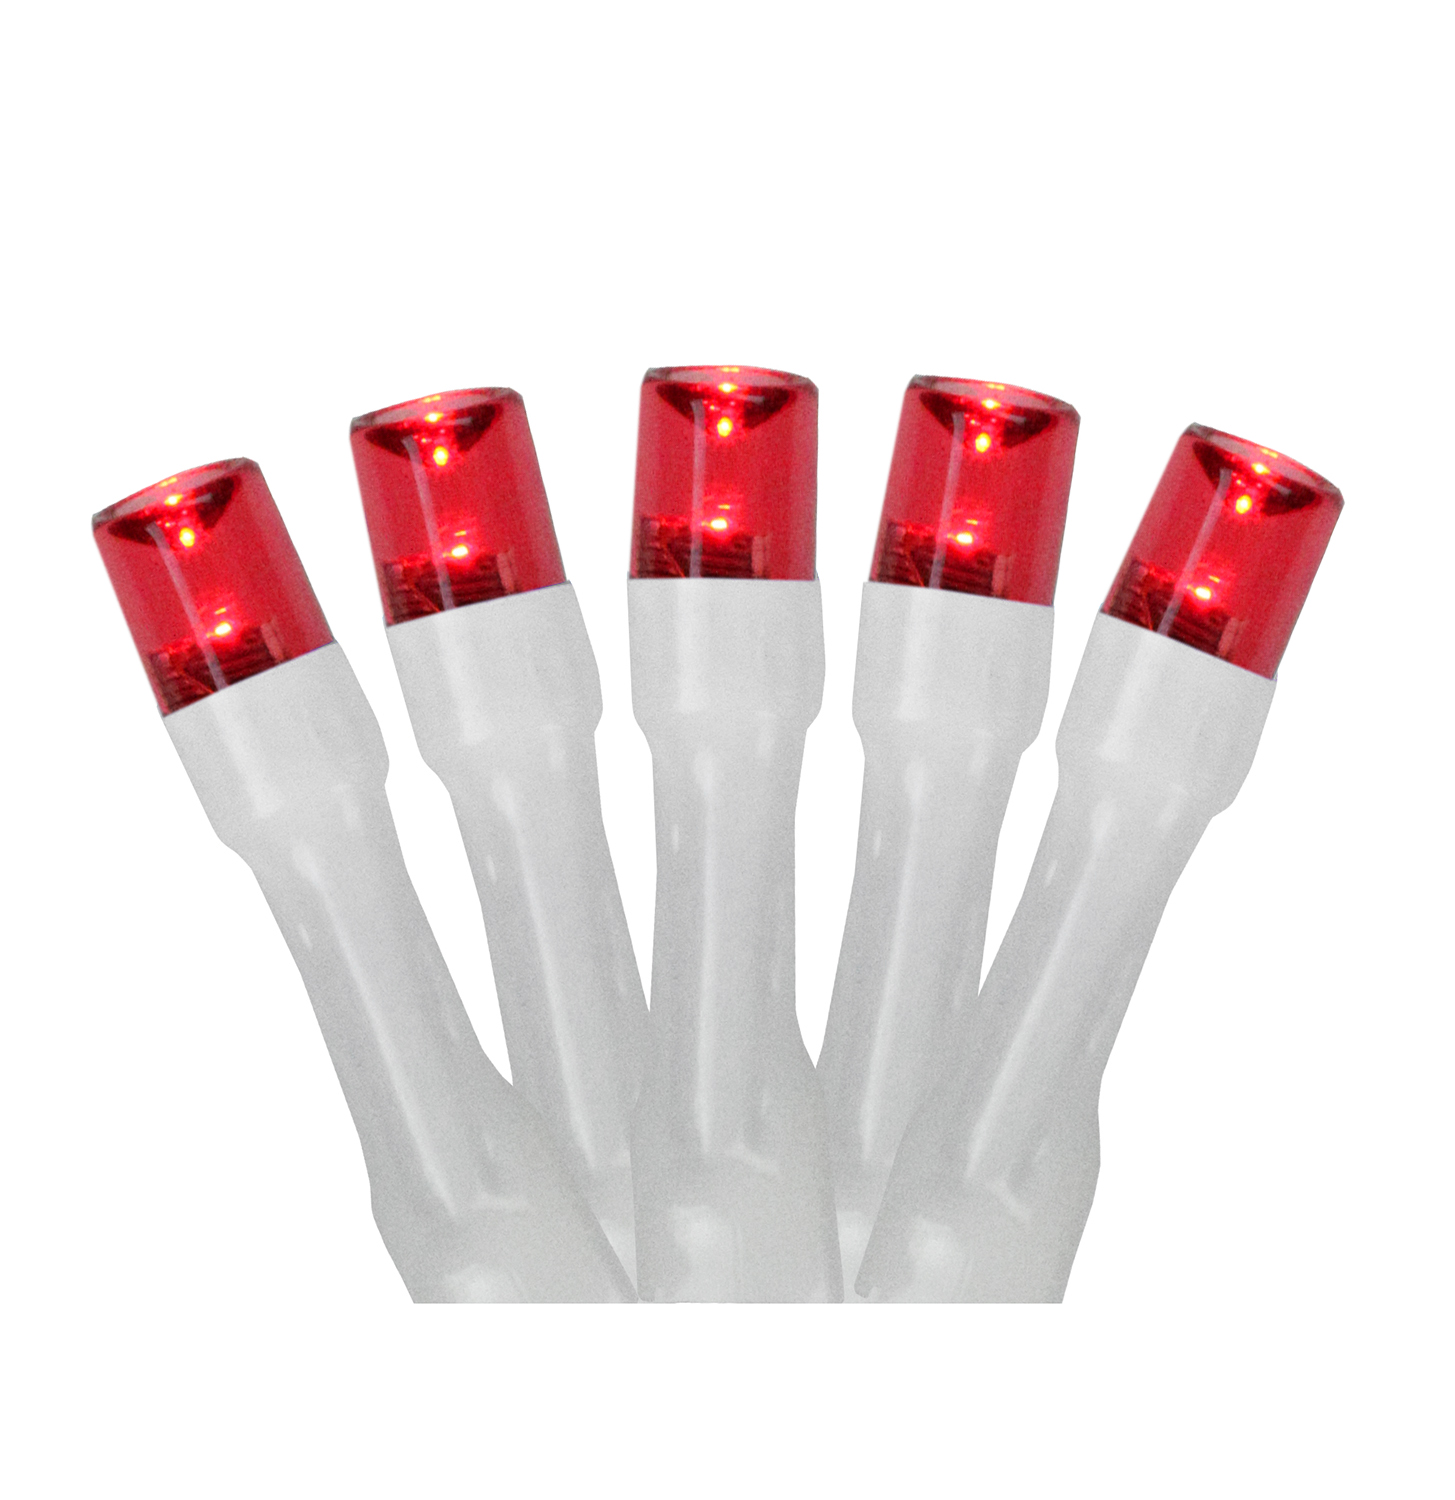 Northlight 20 Battery Operated Red LED Wide Angle Mini Christmas Lights - 9.5 ft White Wire